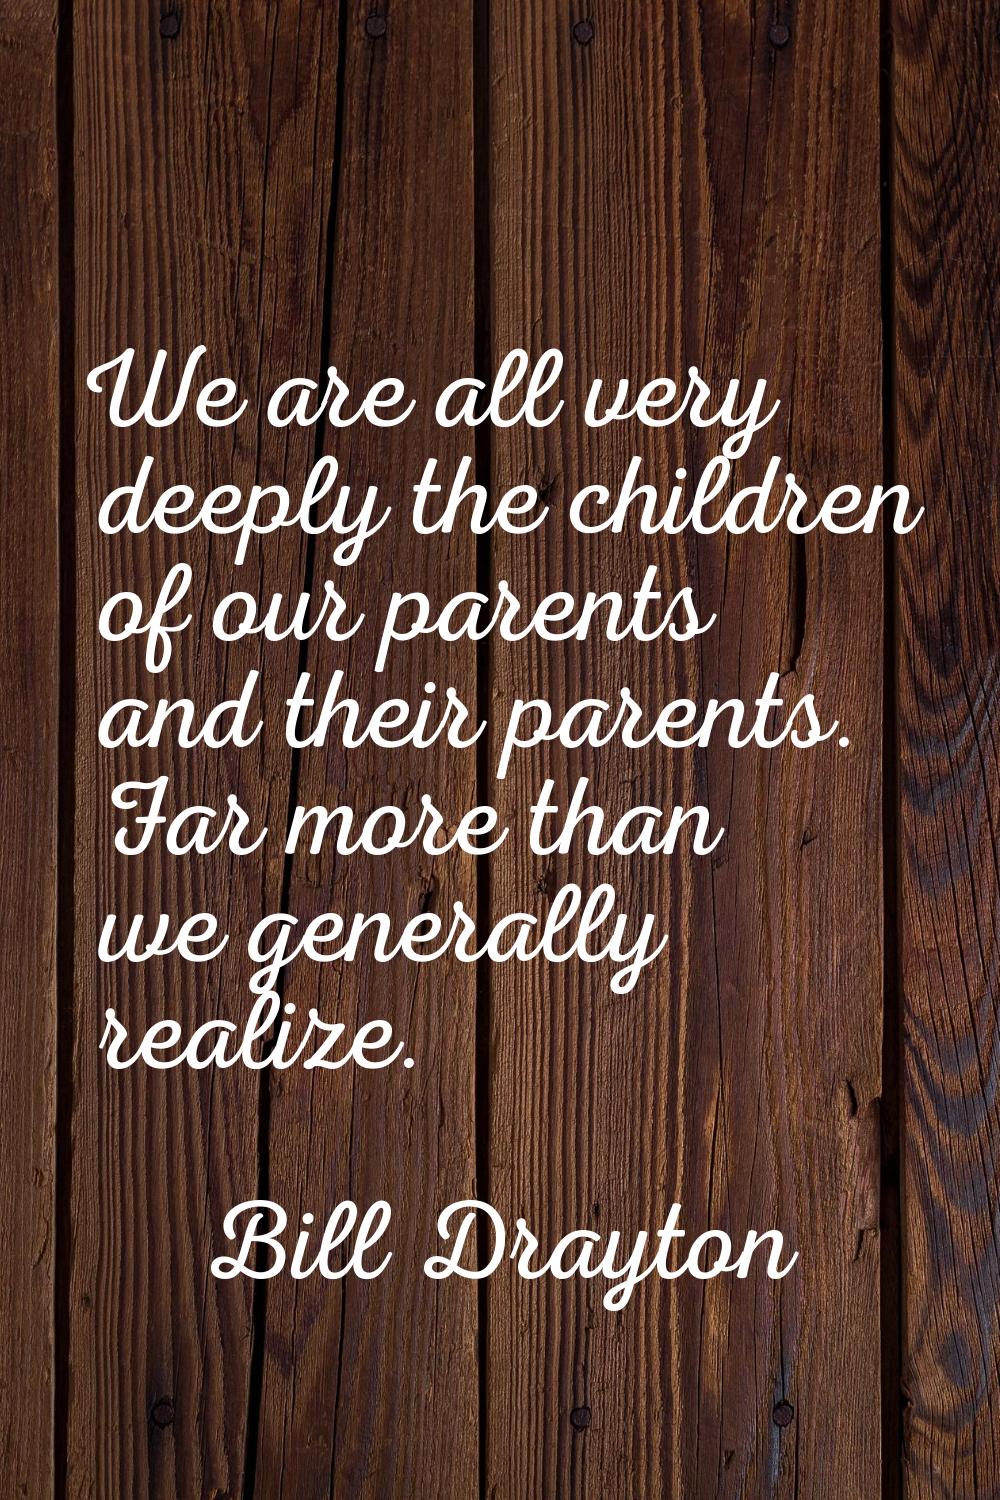 We are all very deeply the children of our parents and their parents. Far more than we generally re